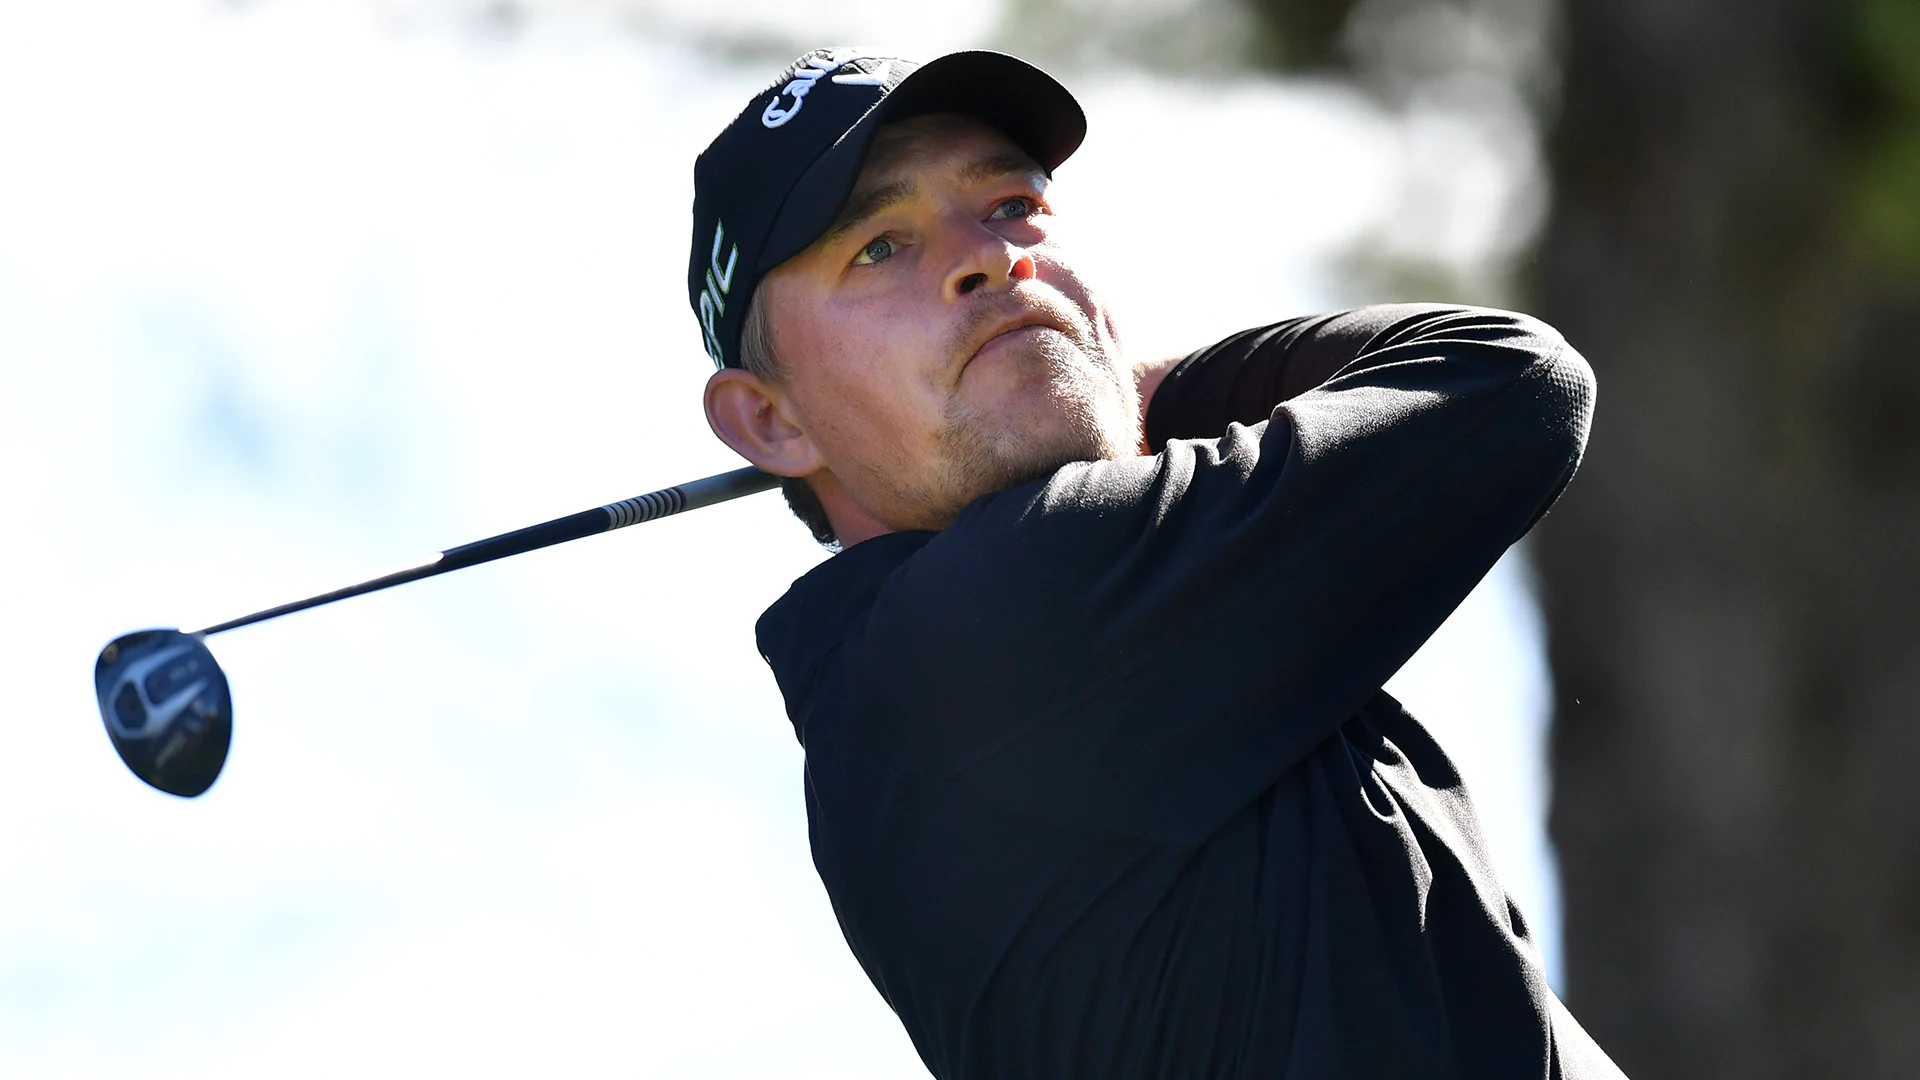 Jeff Winther leads Mallorca Open after 10 birdies in Round 1